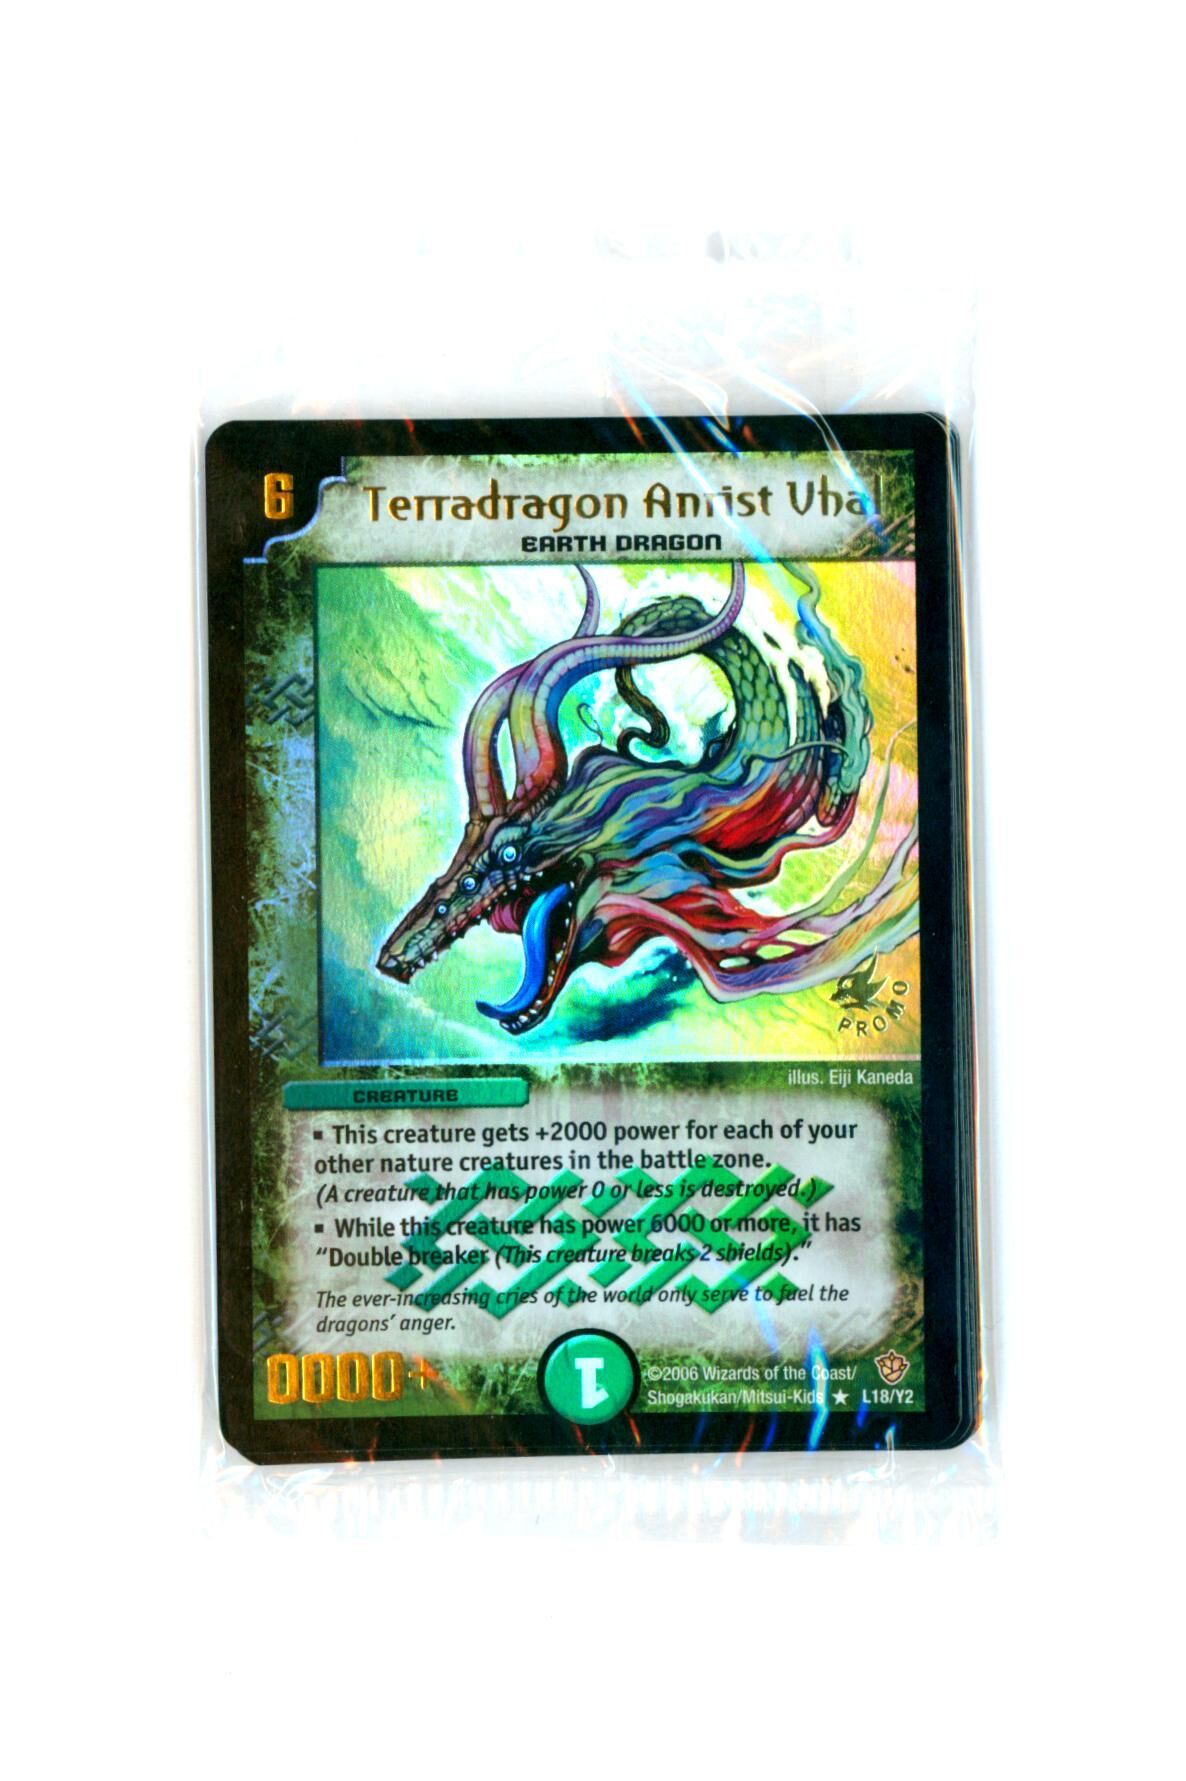 Terradragon Anrist Vhal Duel Masters TCG Booster Pack